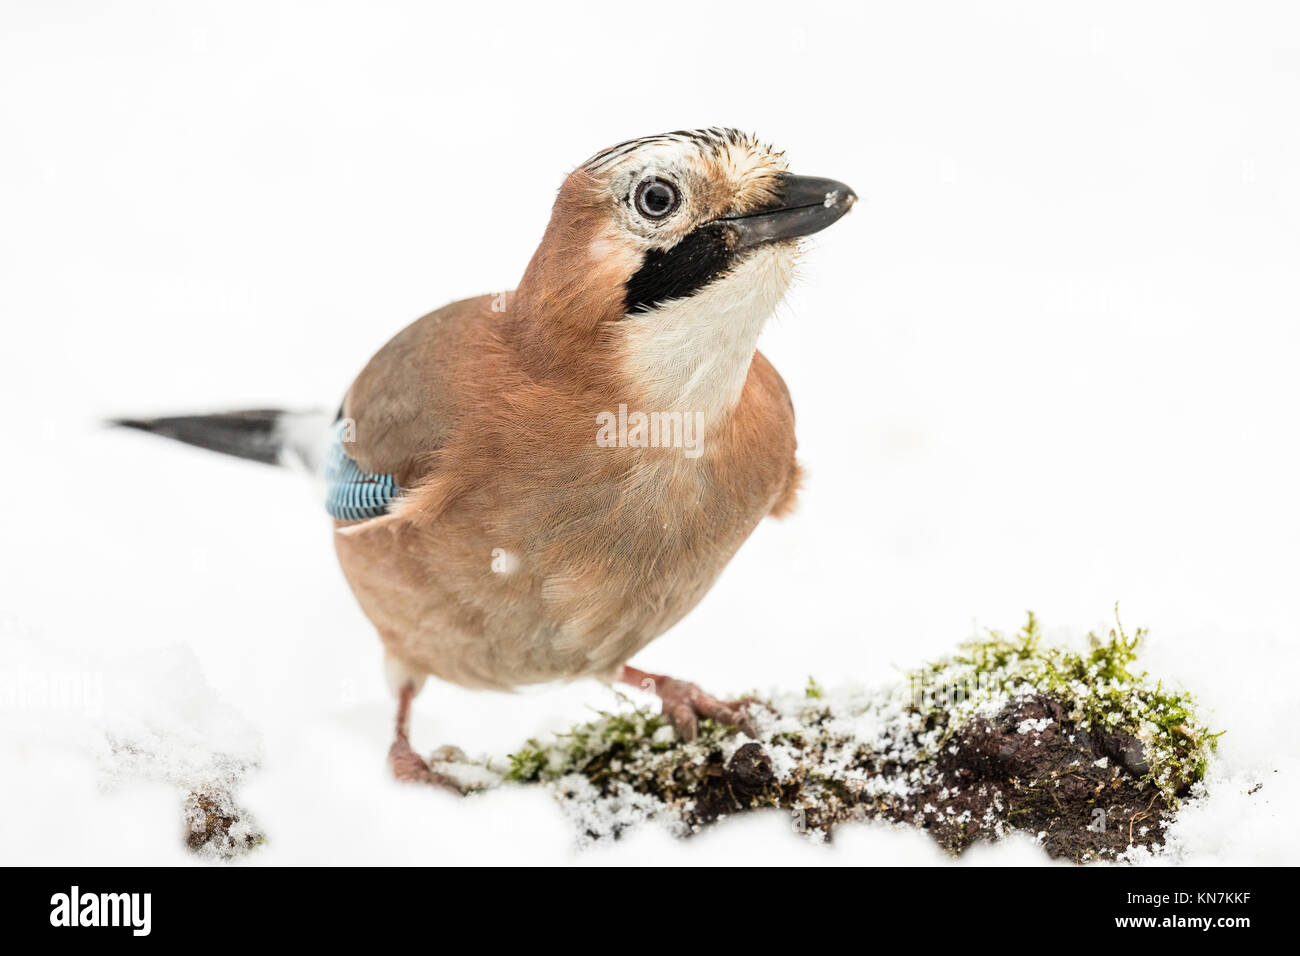 A jay foraging in a snowy winter setting Stock Photo